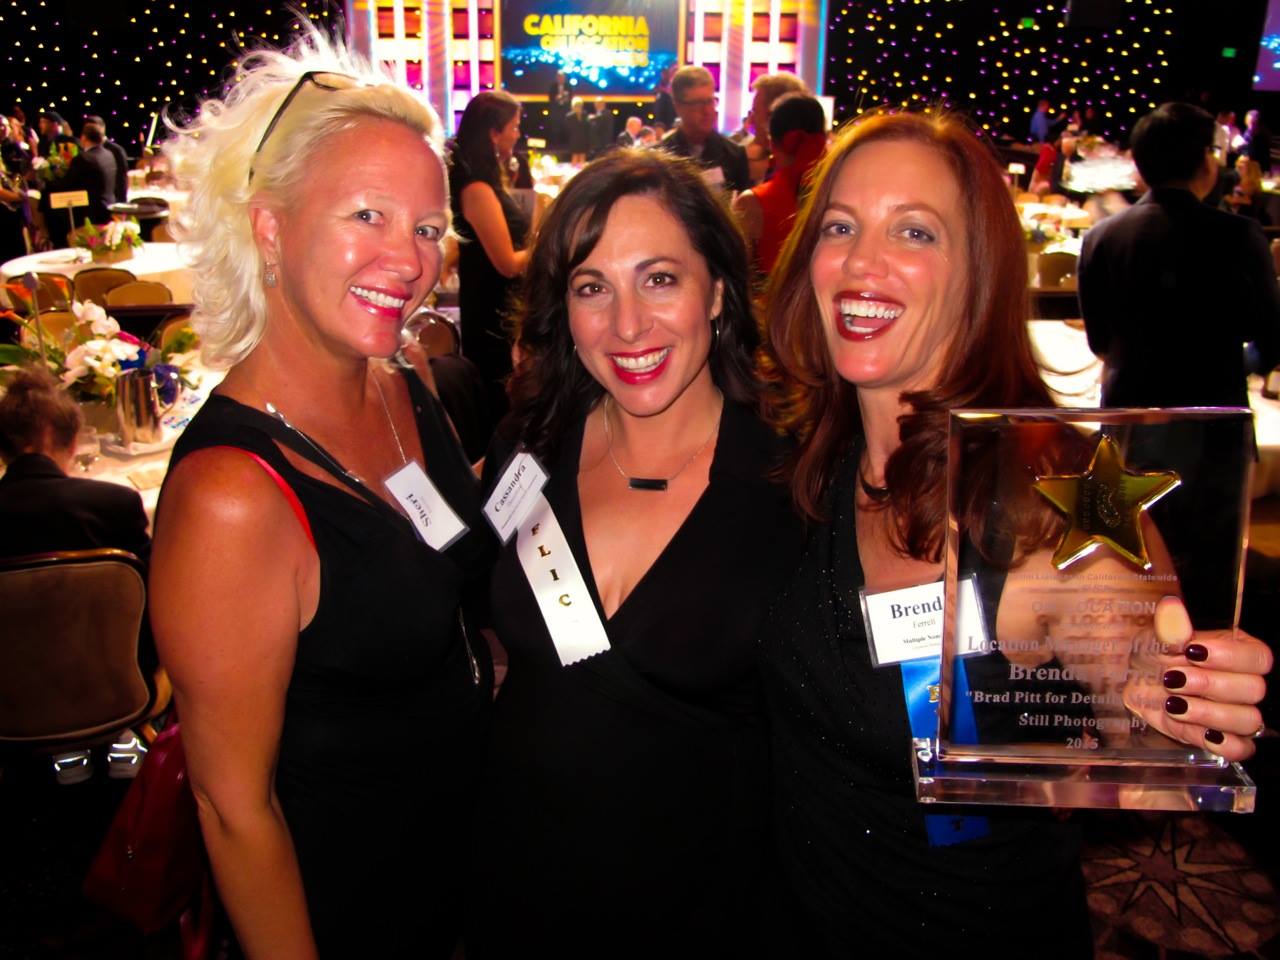 2015 COLA award show with (left to right) Sheri Salinas (Ferrell's Scouting Partner), Hesseltine, and Brenda Ferrell (Winner of Location Manager of the Year for Brad Pitt Still Shoot in Humboldt County)